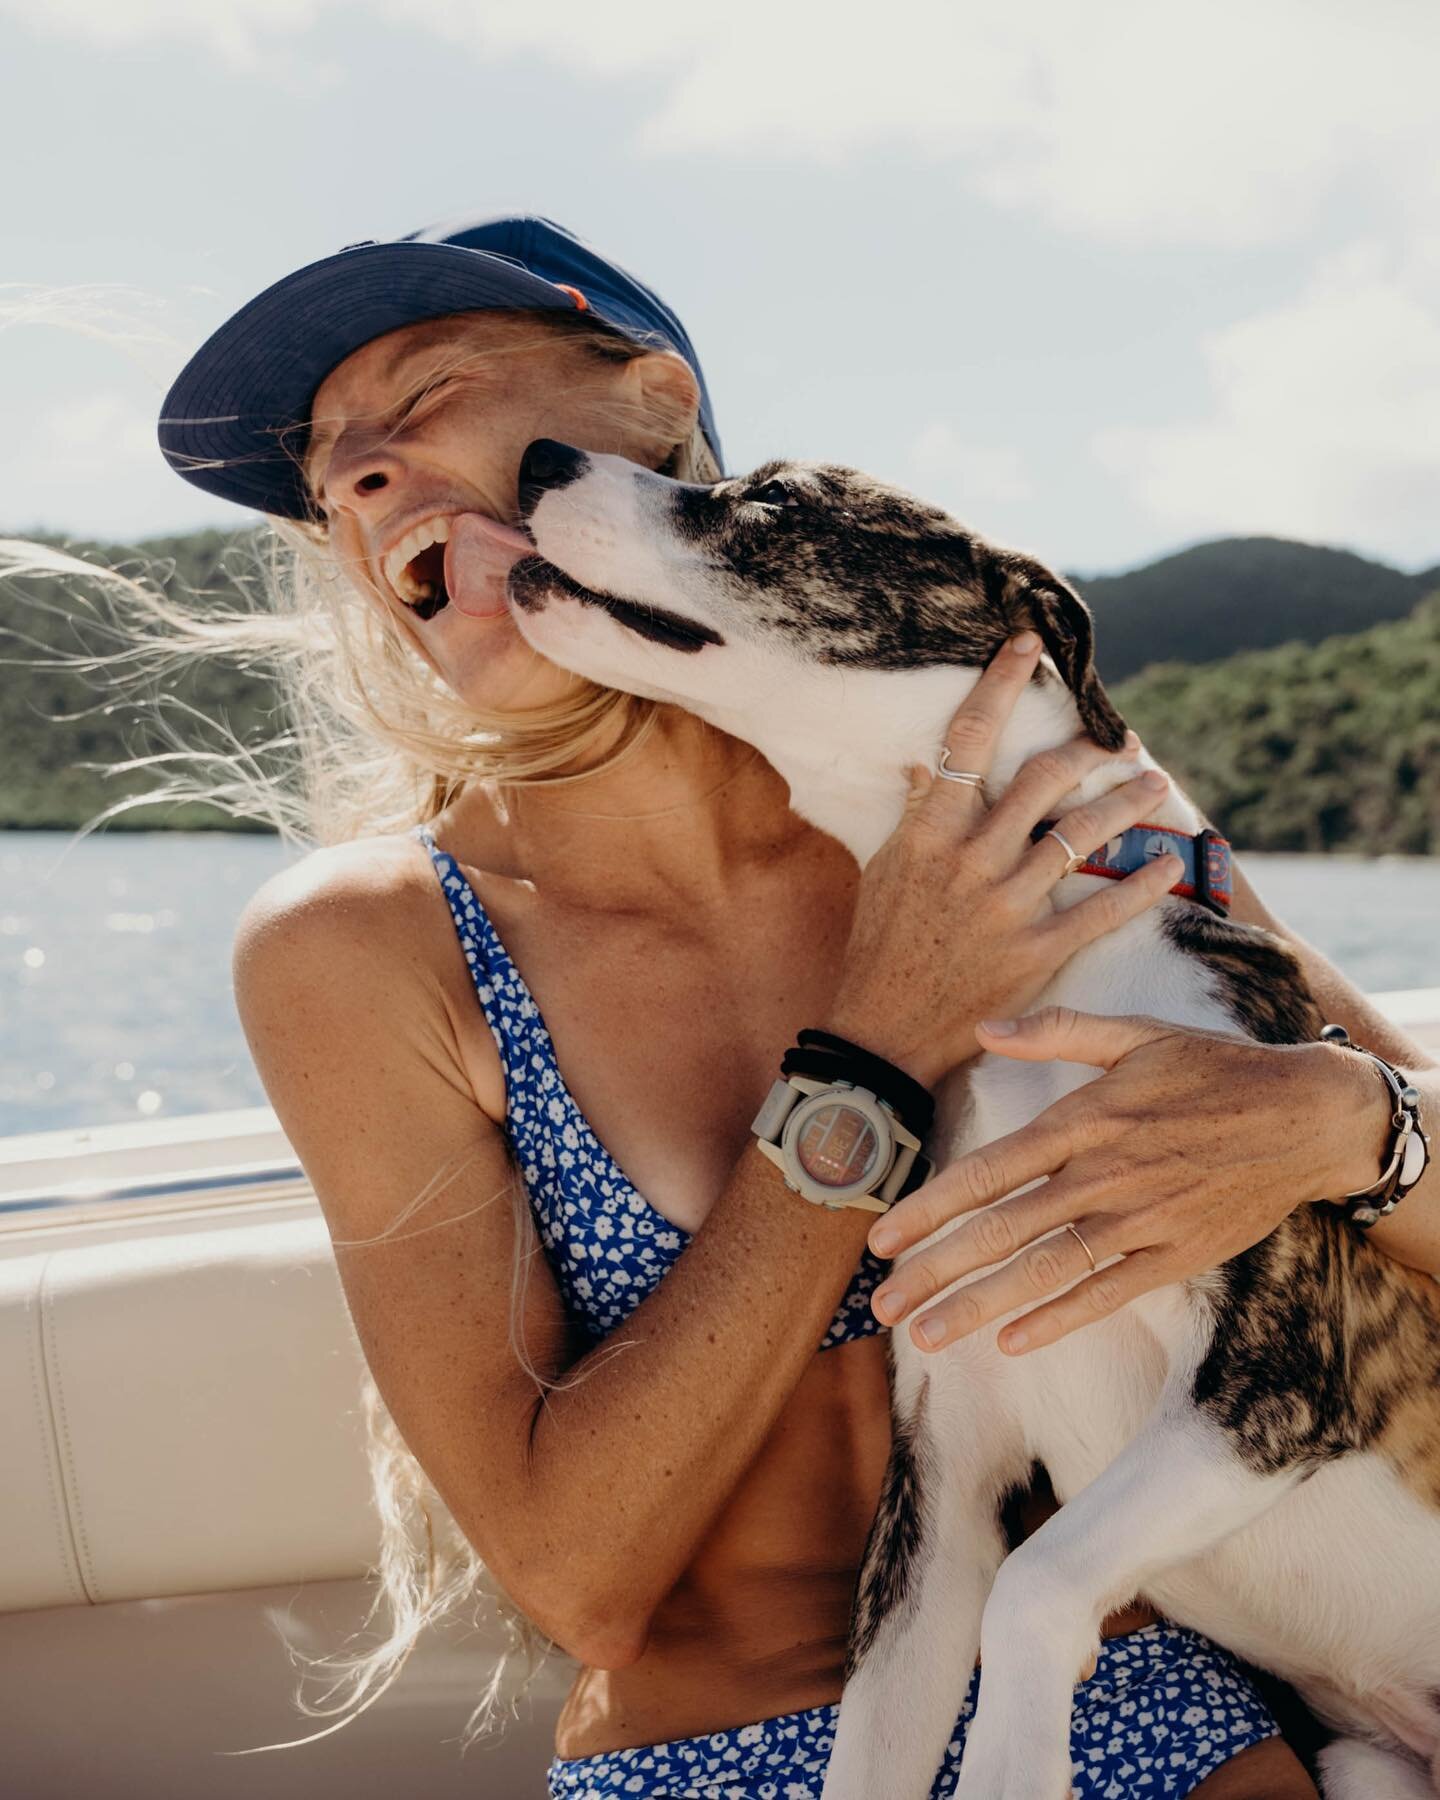 Puppy kisses included at no extra cost. 
📷 @sarahbswan 

#charter #charterboat #vacation #usvi #vi #bvi #stjohn #stthomas #visitusvi #vacationgoals #passionpassport #caribbean #caribbeanvacation #boating #worldcat #virginislands #yamahaoutboards #ex